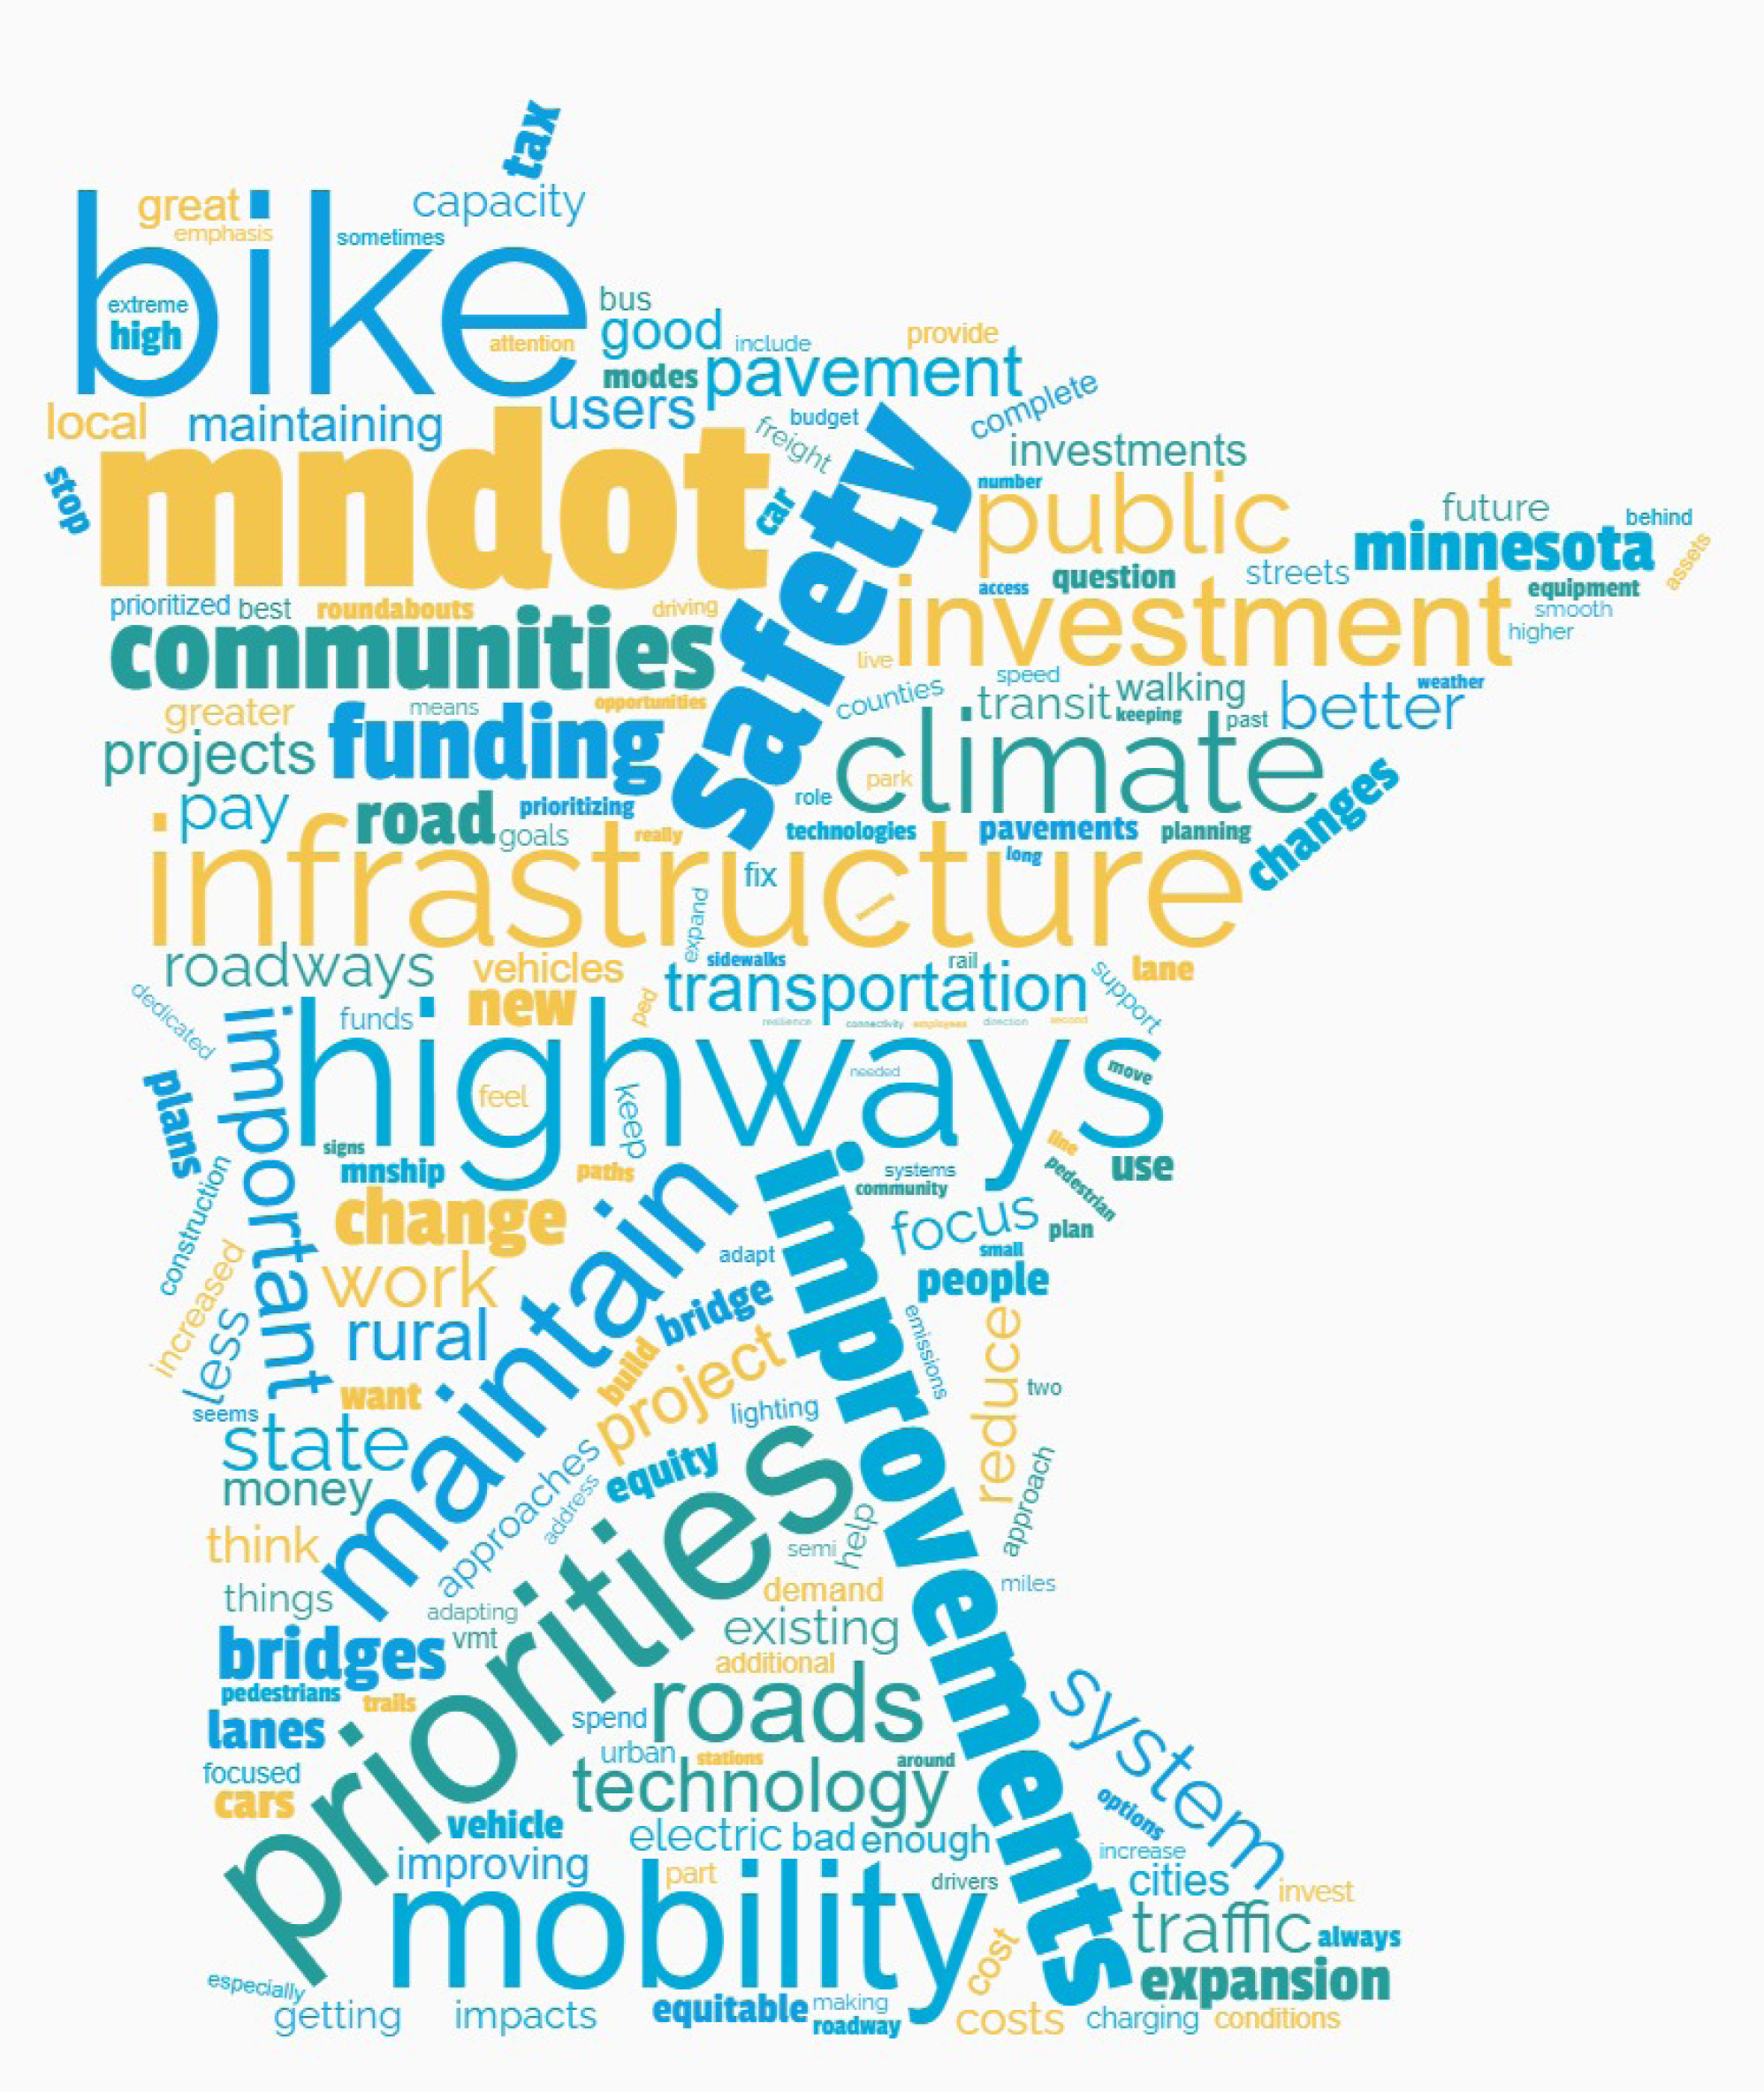 A word cloud in the shape of Minnesota with words like: Mobility, mndot, safety, improvements, infrastructure, bike, etc.